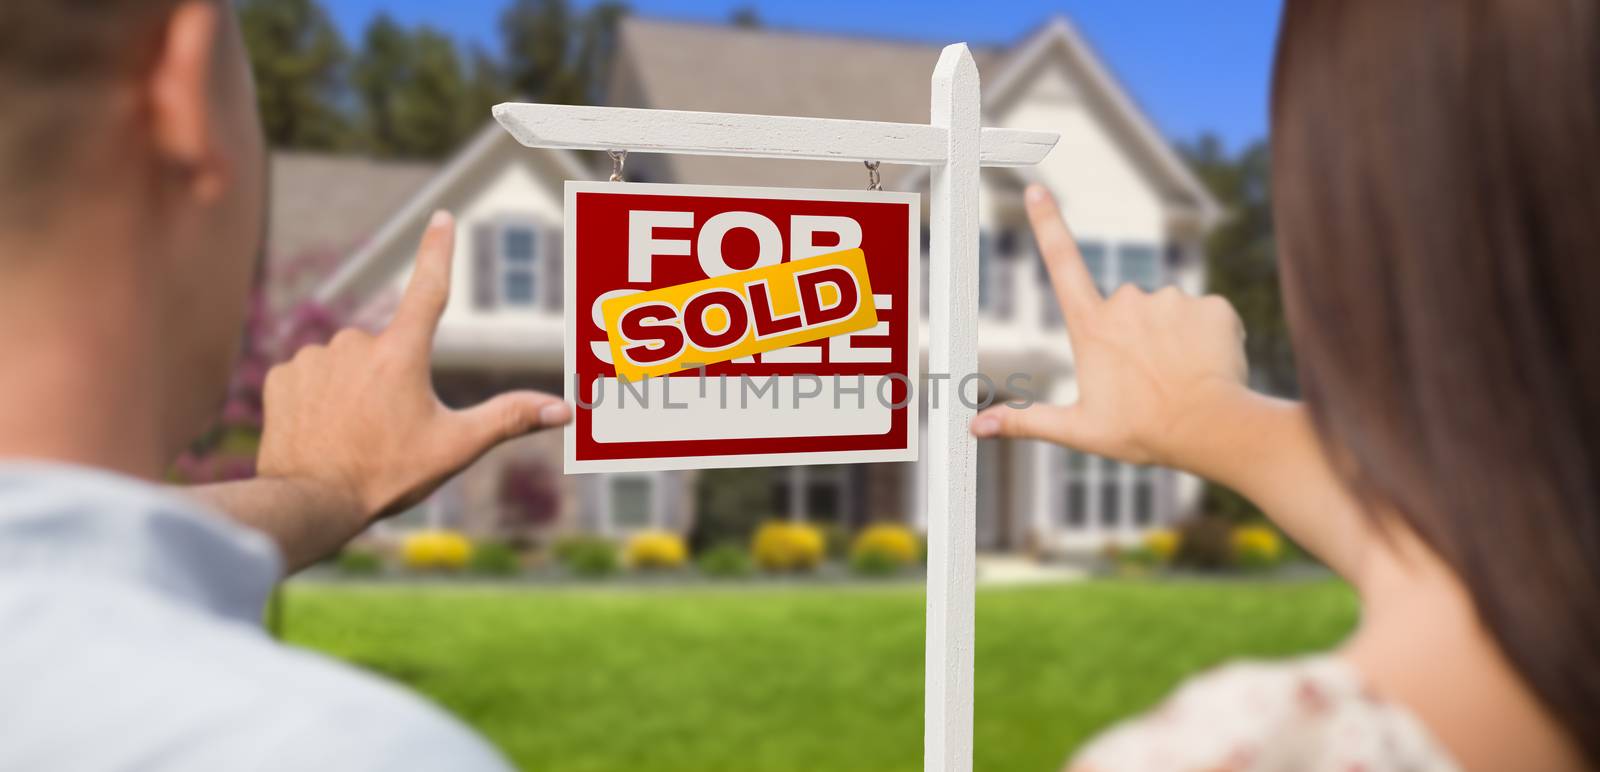 Sold For Sale Real Estate Sign, House and Military Couple Framing Hands in Front.